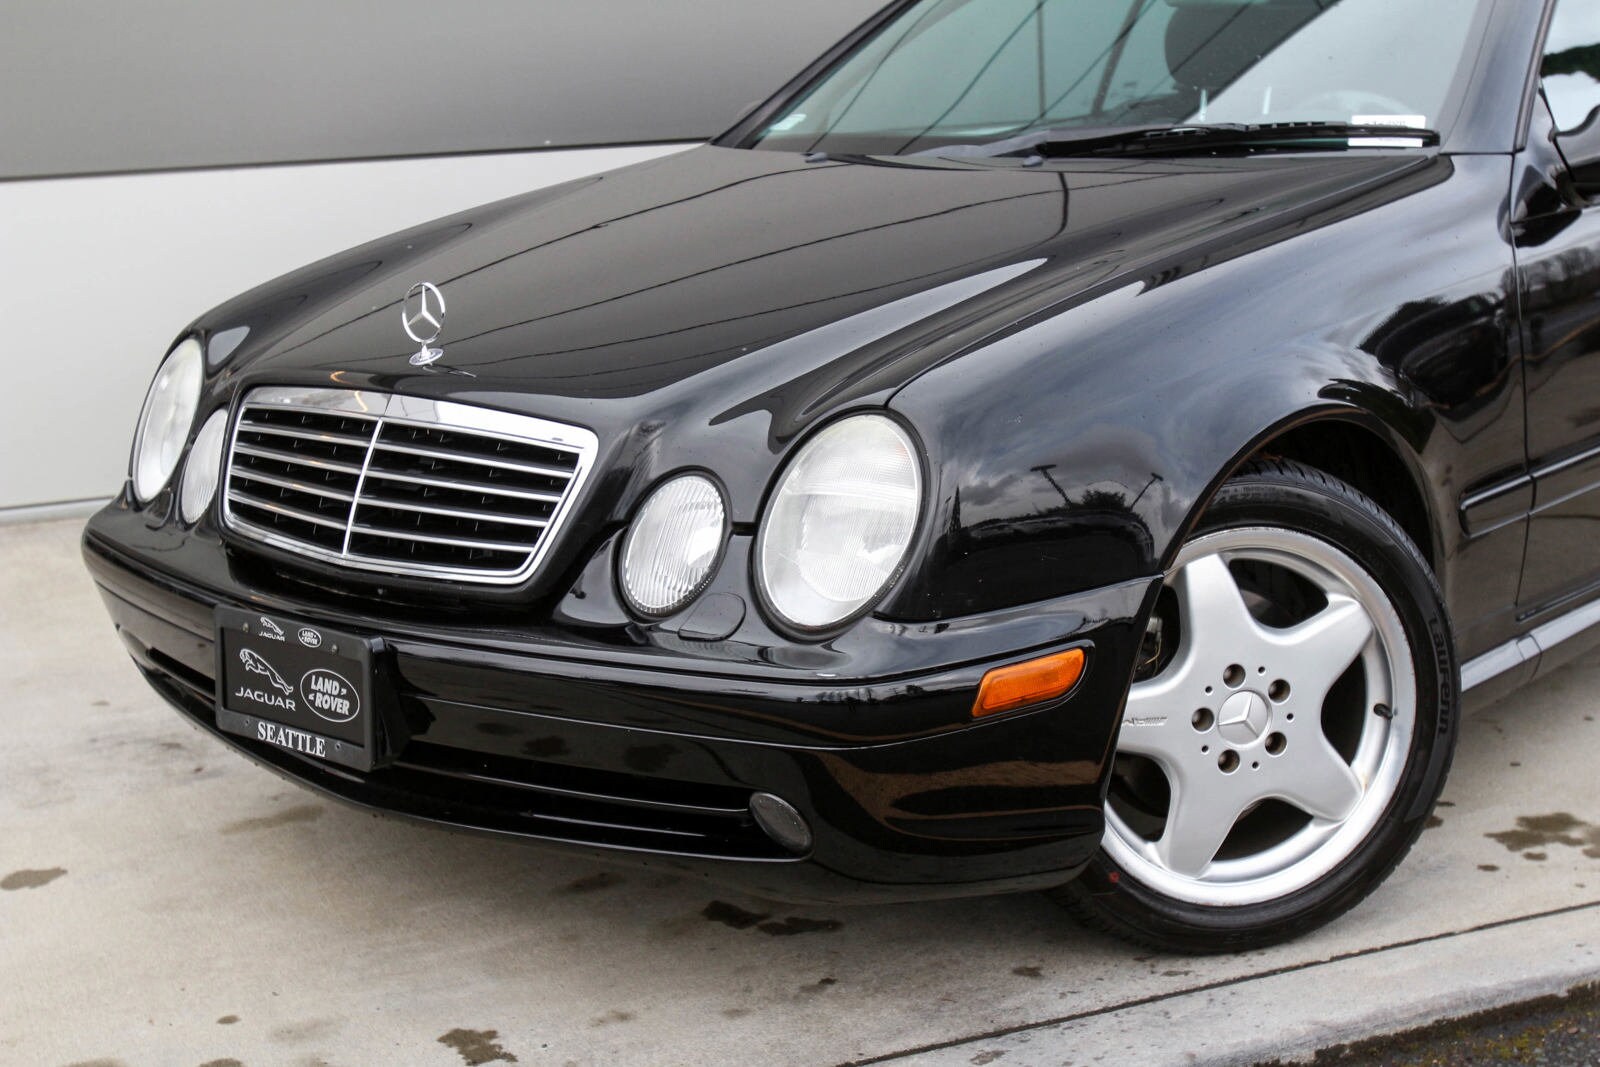 Used 2001 Mercedes-Benz CLK CLK430 with VIN WDBLK70G91T070754 for sale in Lynnwood, WA